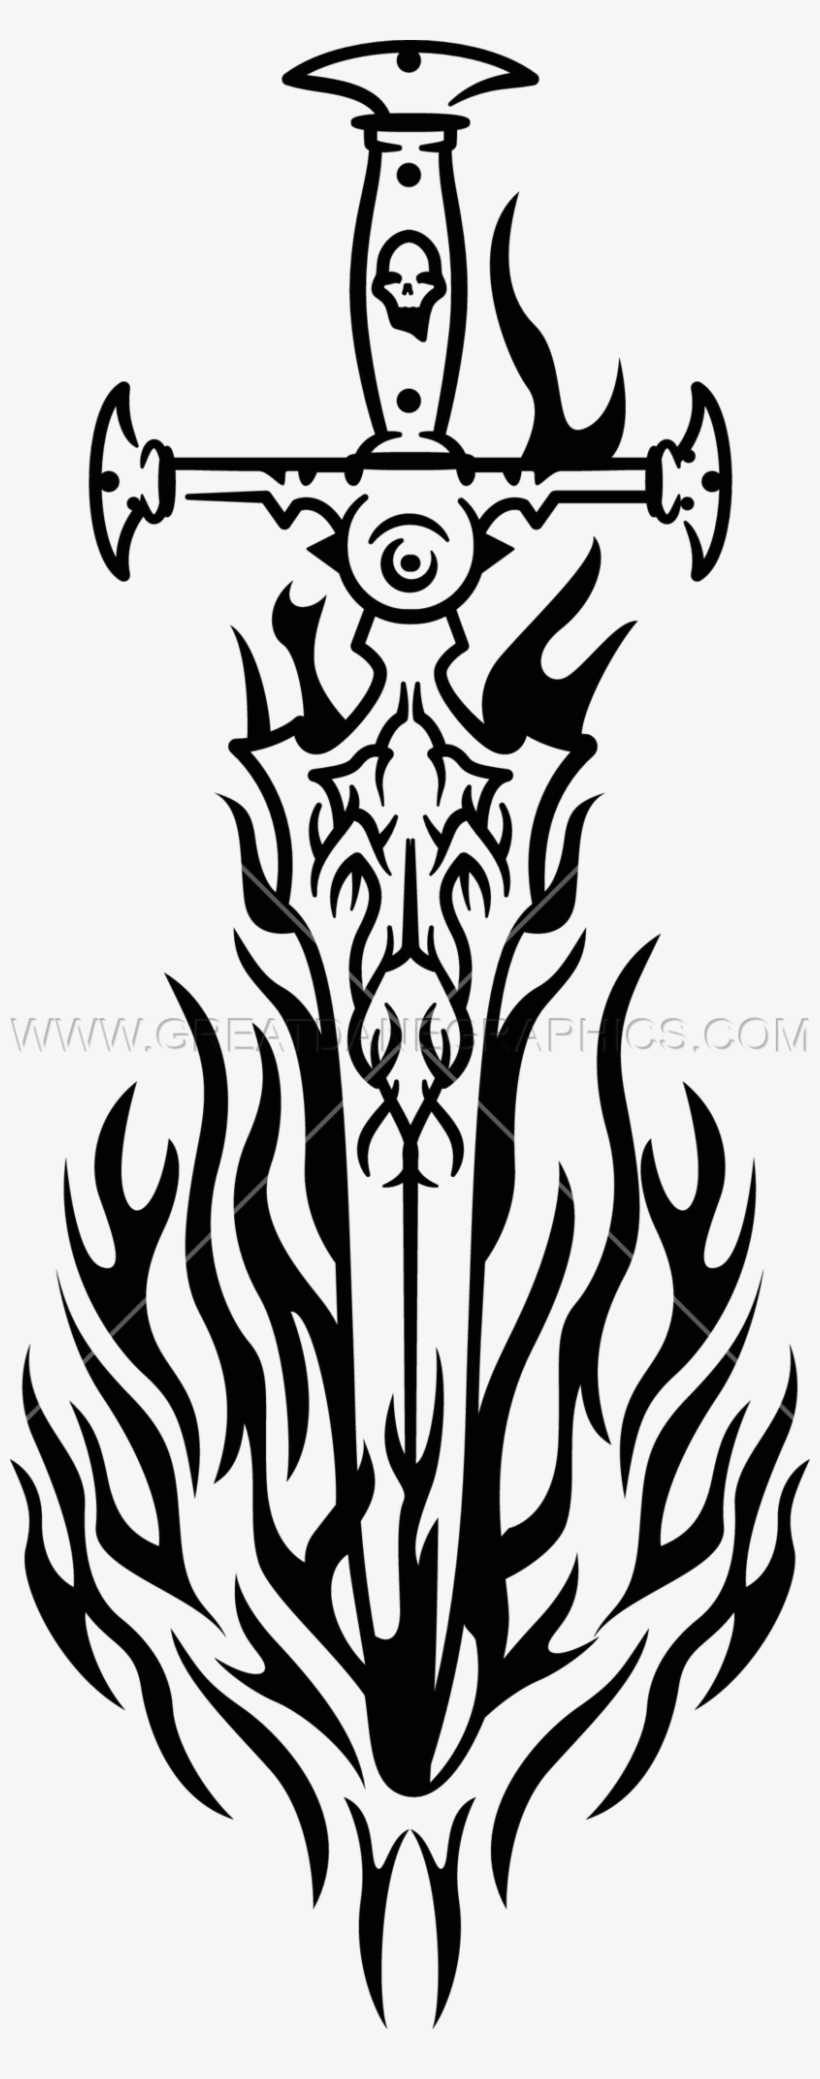 Fire Sword - Fire Sword Black And White, transparent png #602149